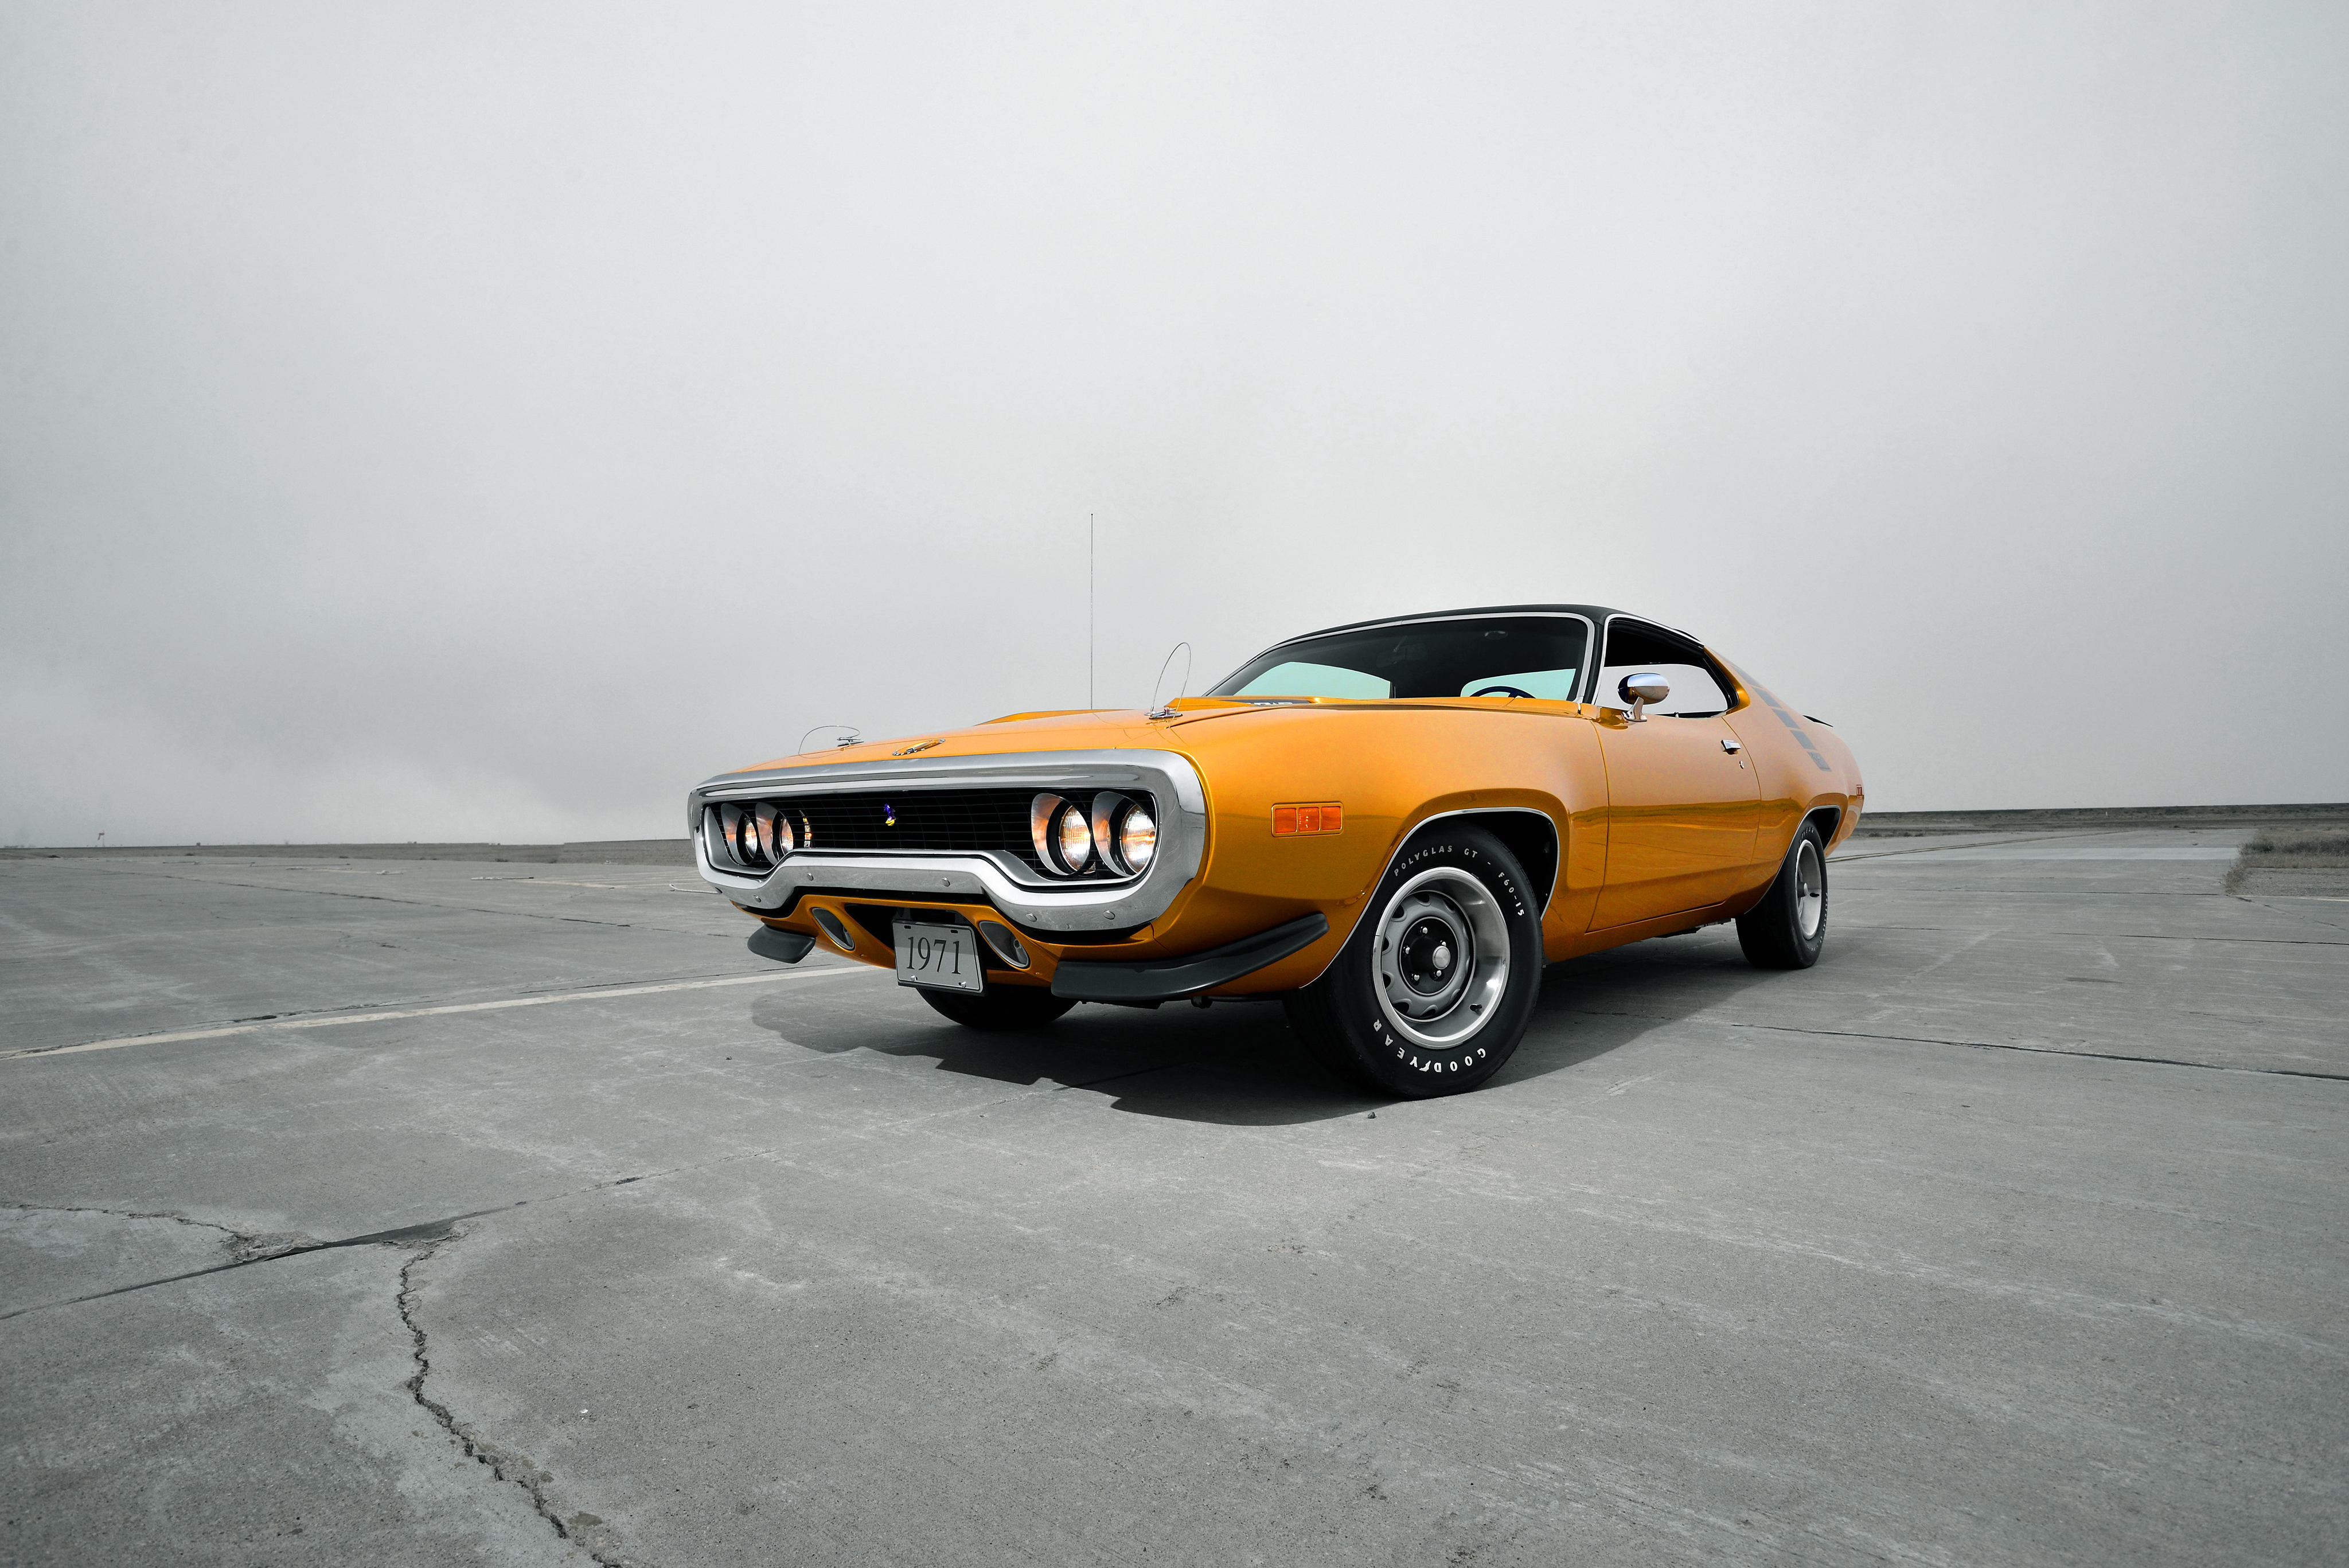 front view, plymouth, cars, road runner, 1971